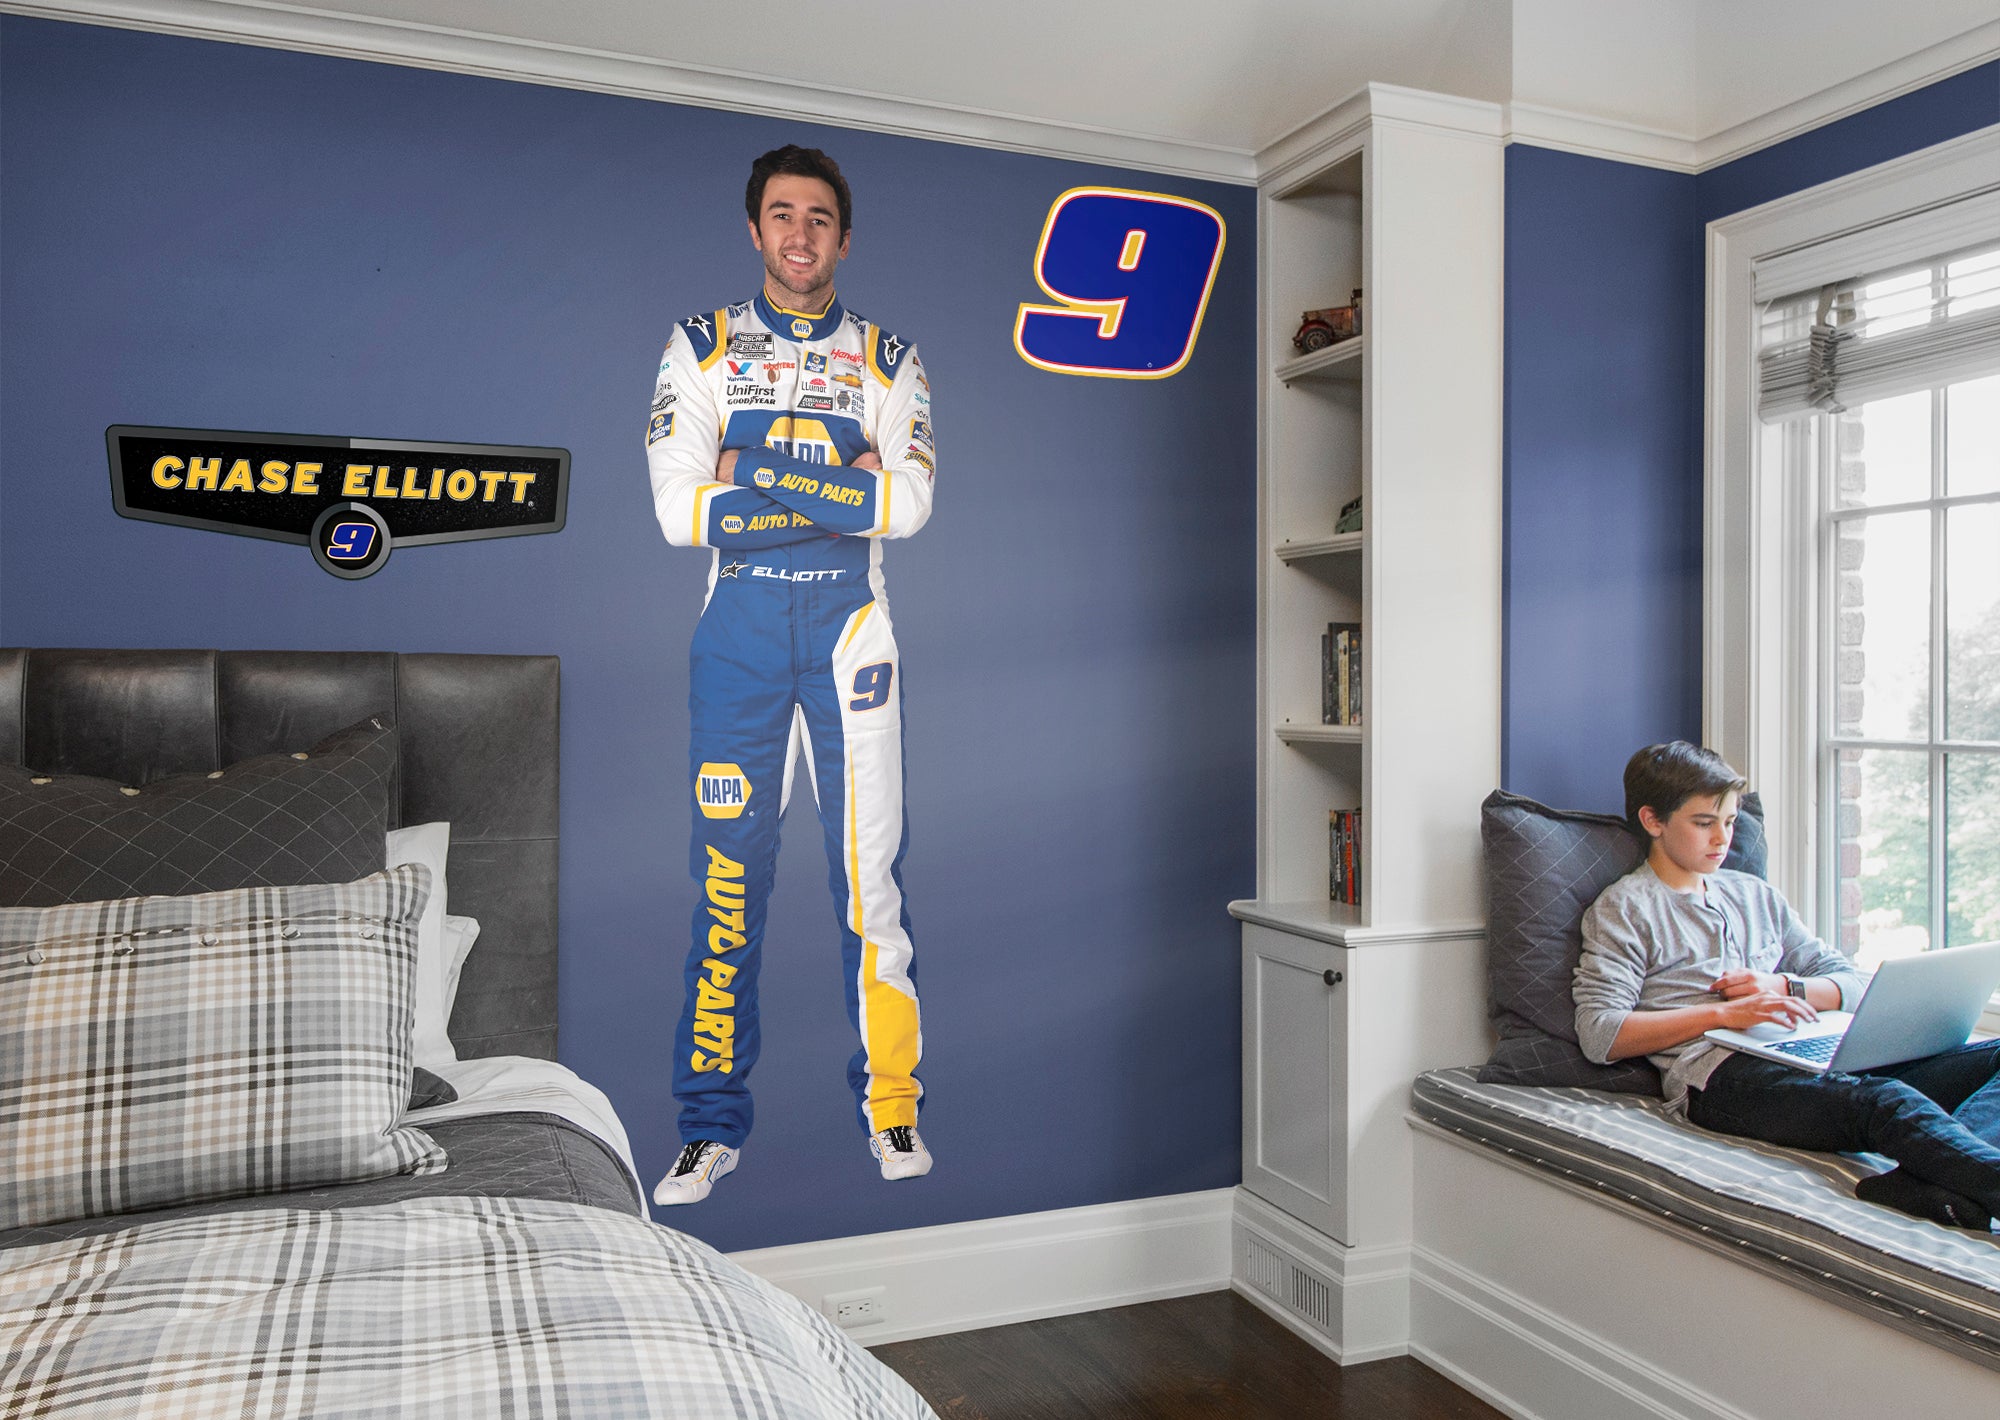 Chase Elliott 2021 Driver - Officially Licensed NASCAR Removable Wall Decal Life-Size Character + 2 Decals (78"W x 23"H) by Fath